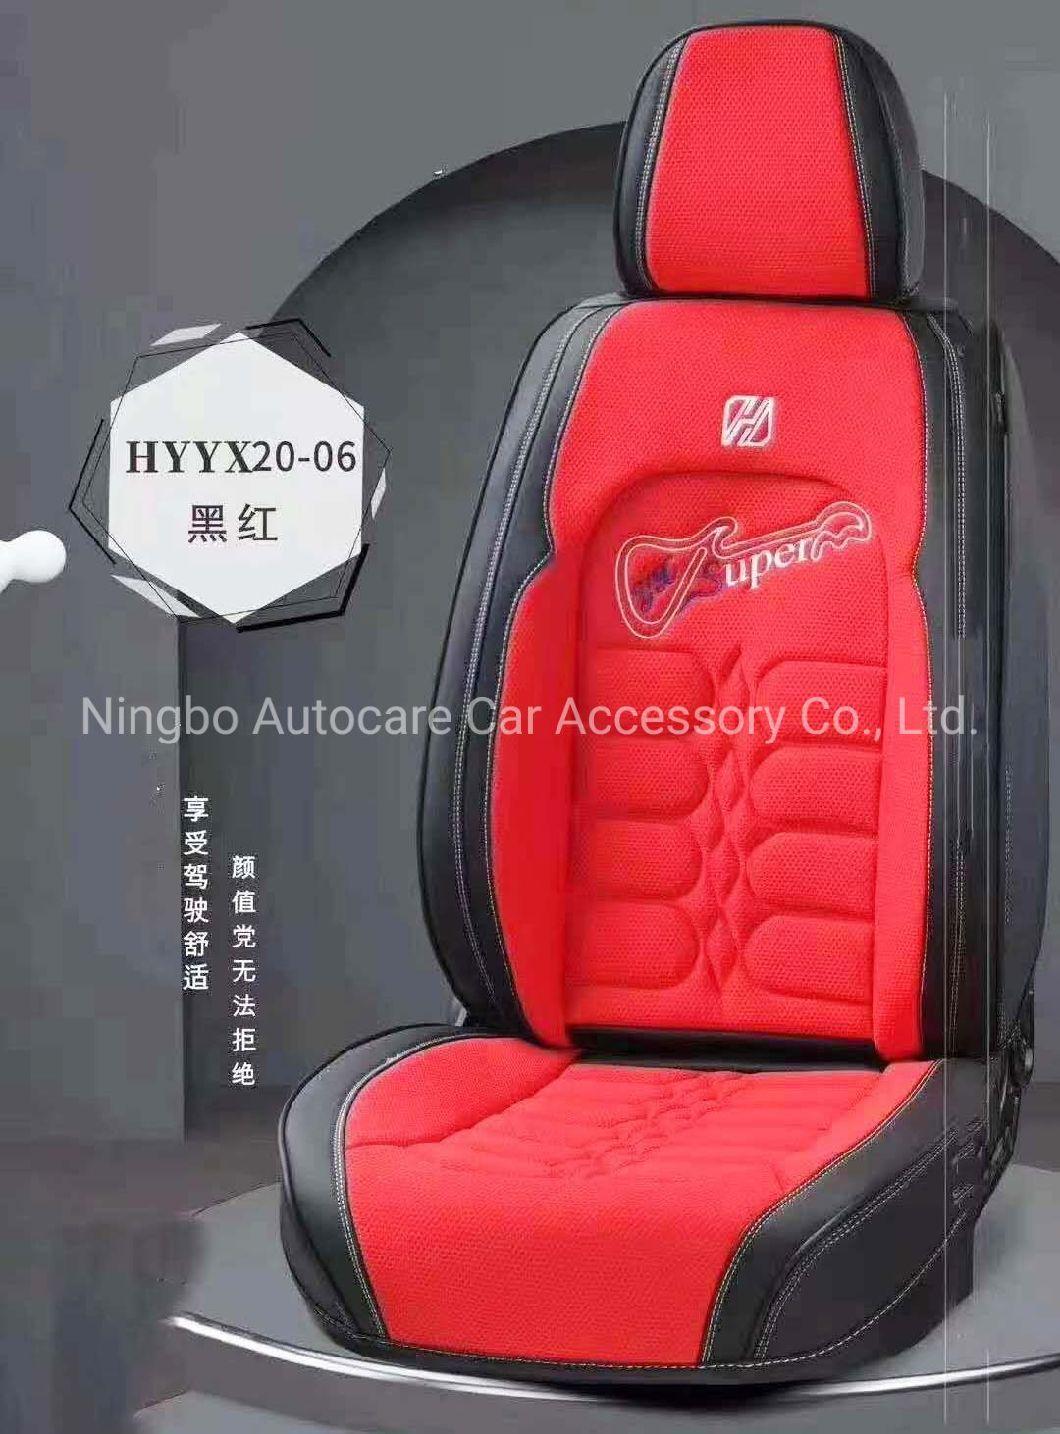 Car Accessories Car Decoration Car Seat Cushion Universal Full Covered PVC Leather Car Seat Cover